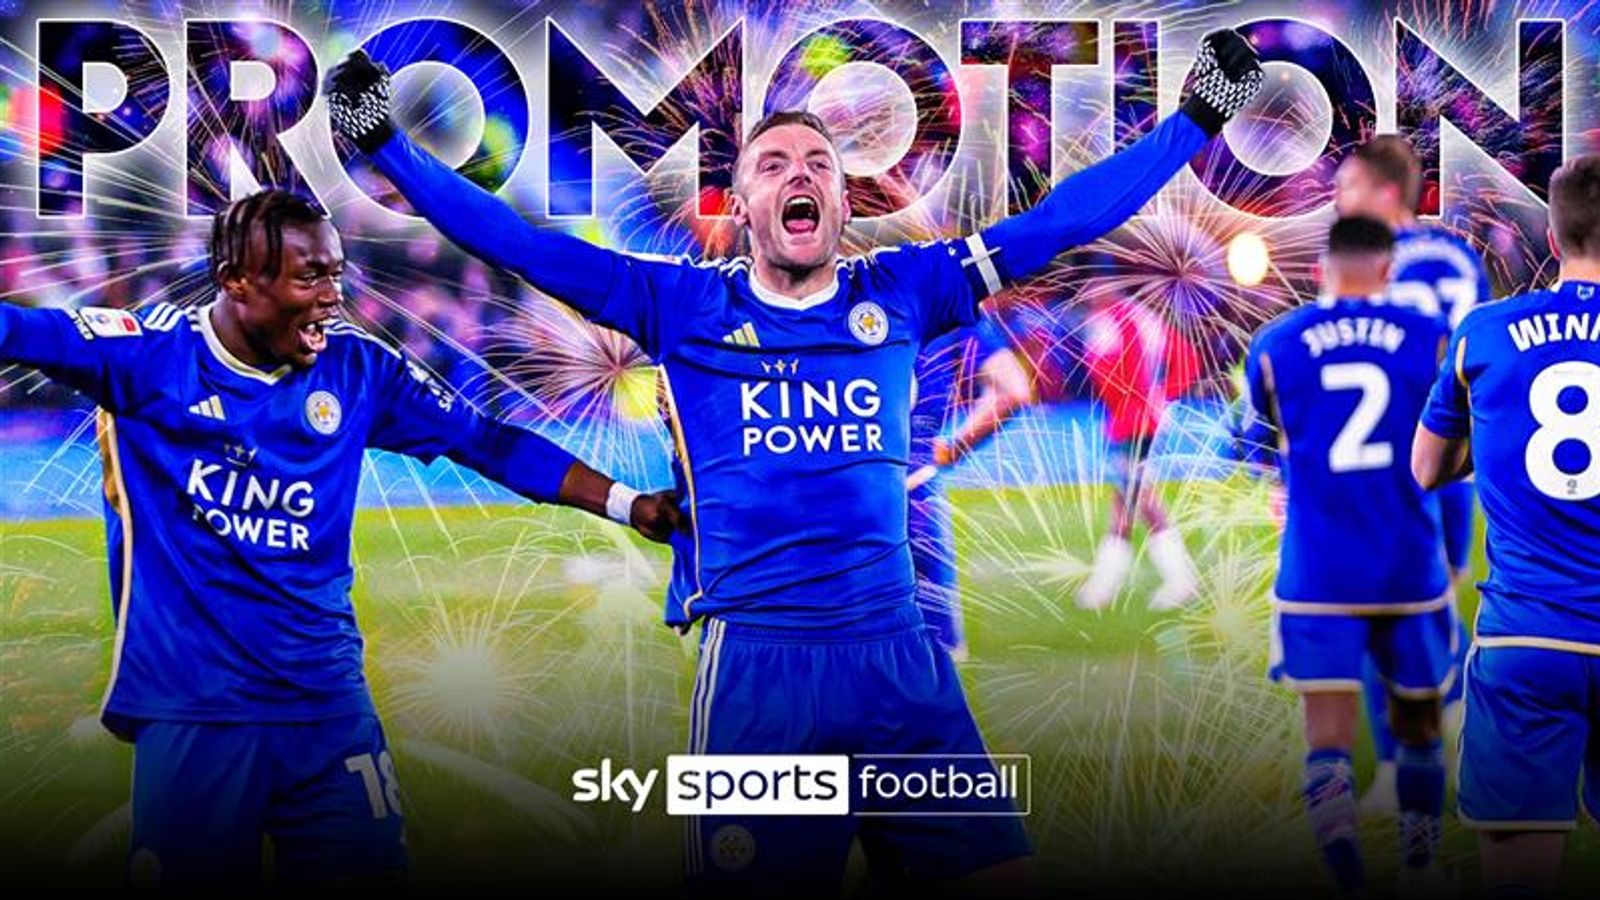 Leicester promoted to Premier League! Leeds loss at QPR confirms Foxes immediate return to the top flight